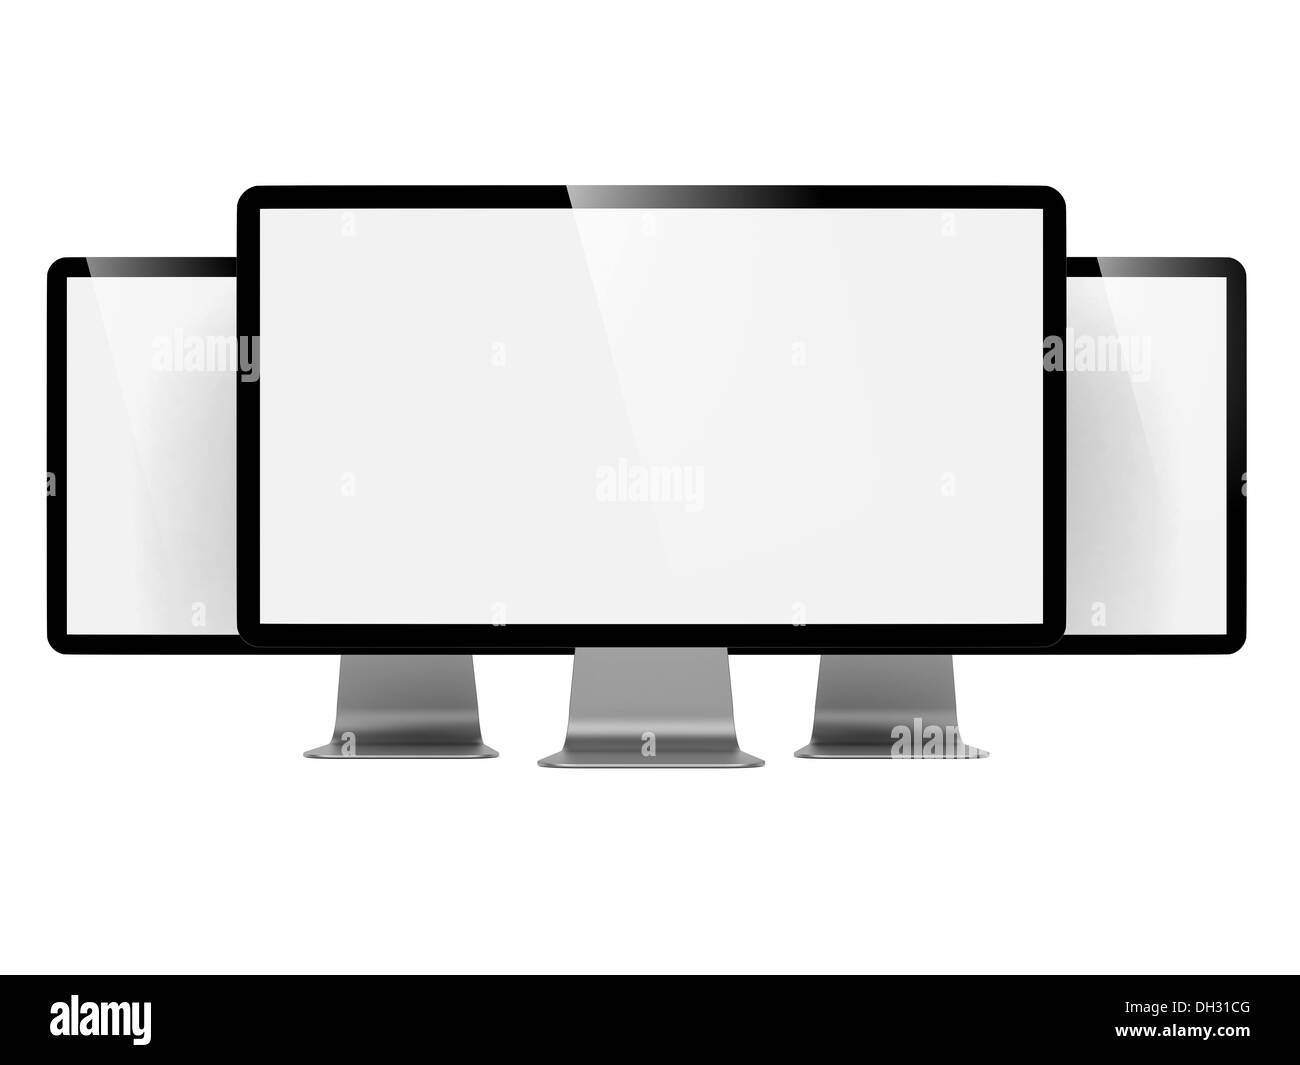 Computer-Display, Isolated on White. Stockfoto